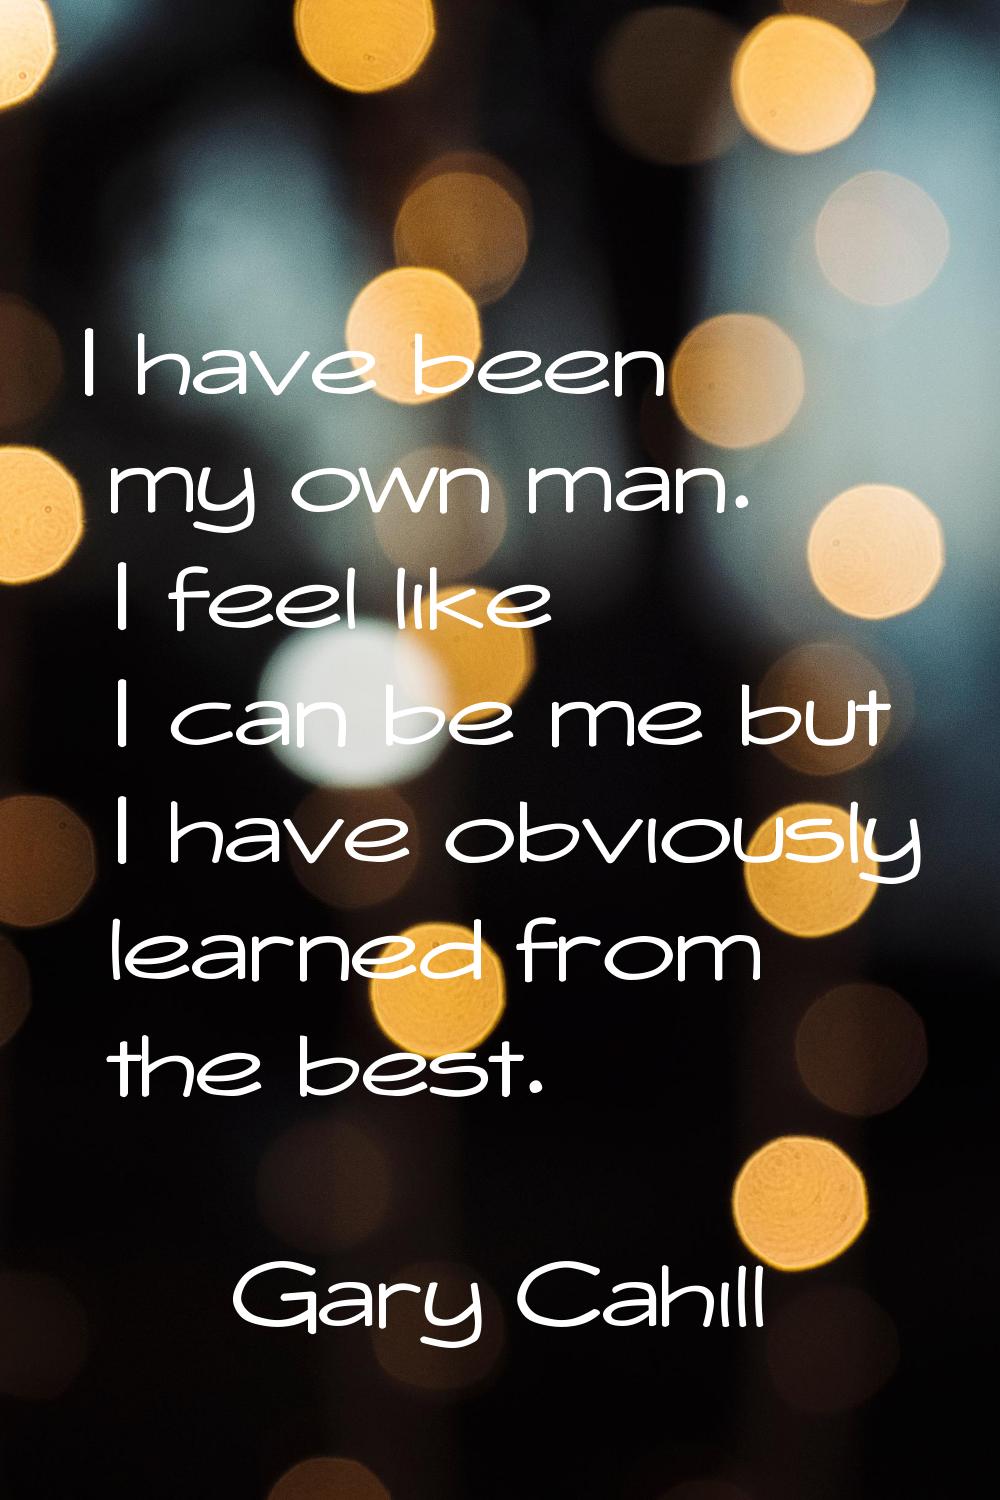 I have been my own man. I feel like I can be me but I have obviously learned from the best.